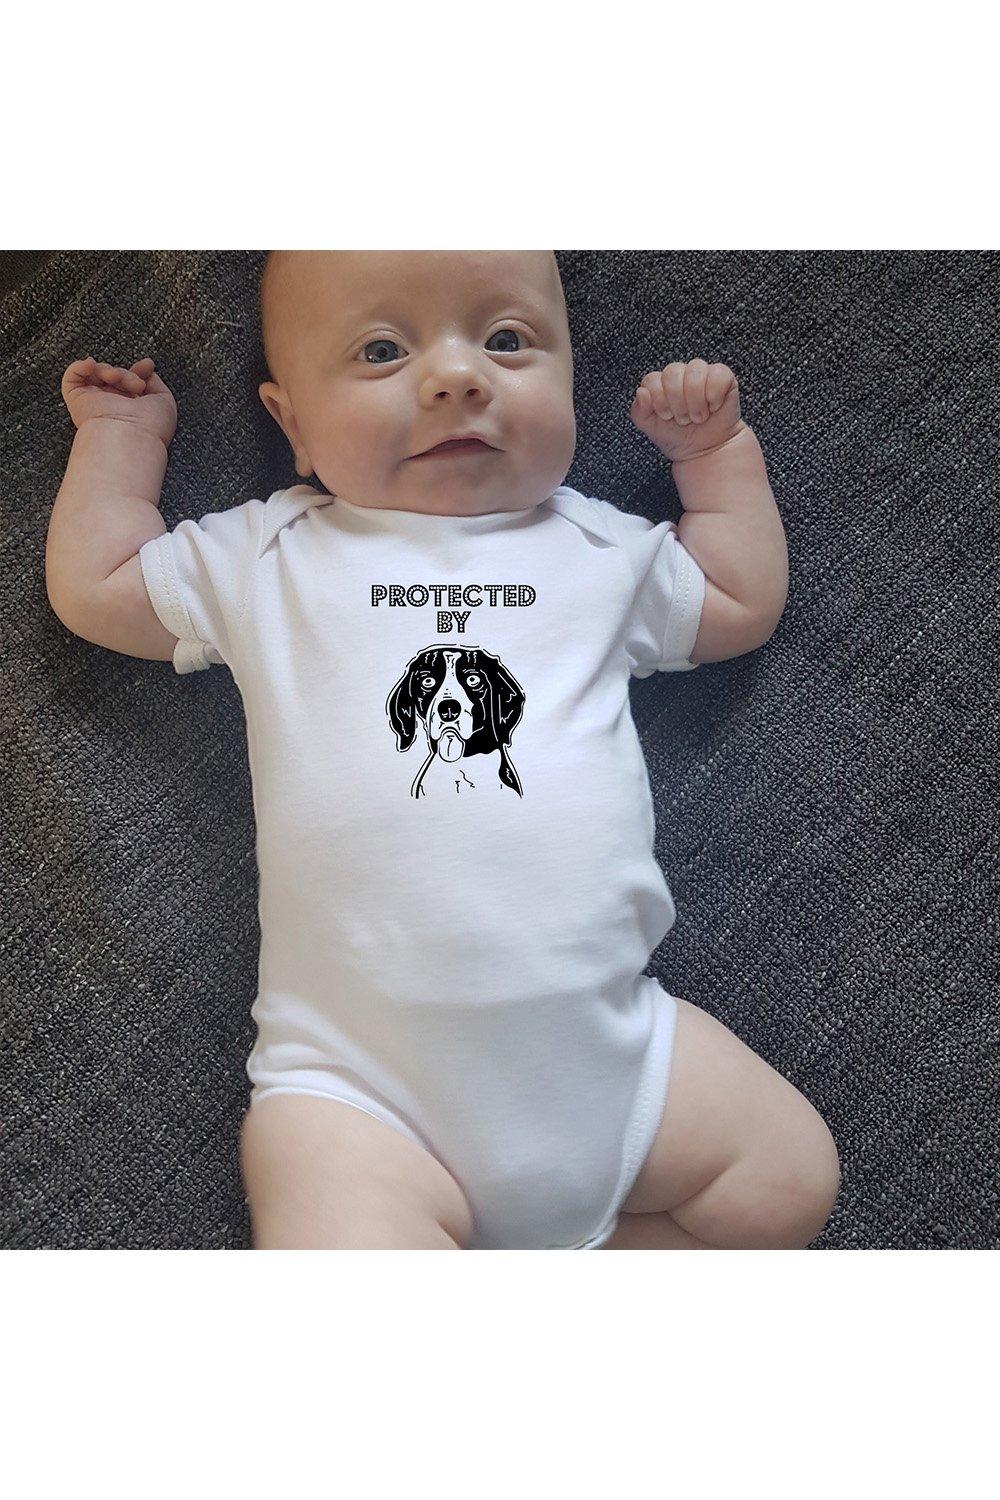 Protected by Airedale Dog Baby bodysuit and Baby Grow